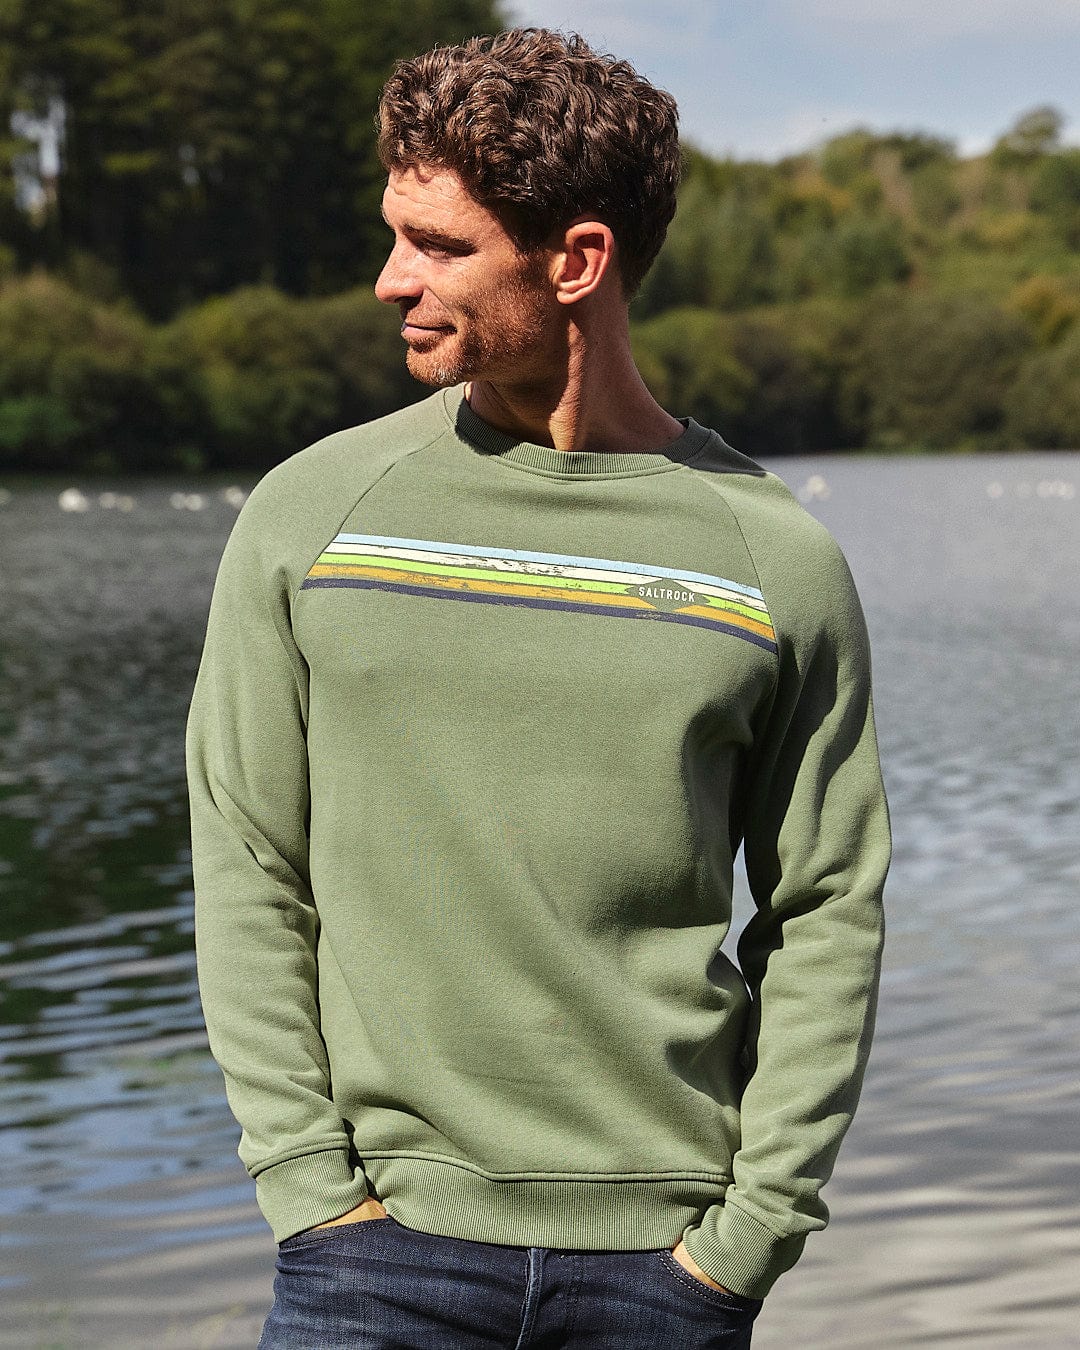 A man walking on a beach with a Saltrock Taped Stripe - Mens Crew Sweat - Green.